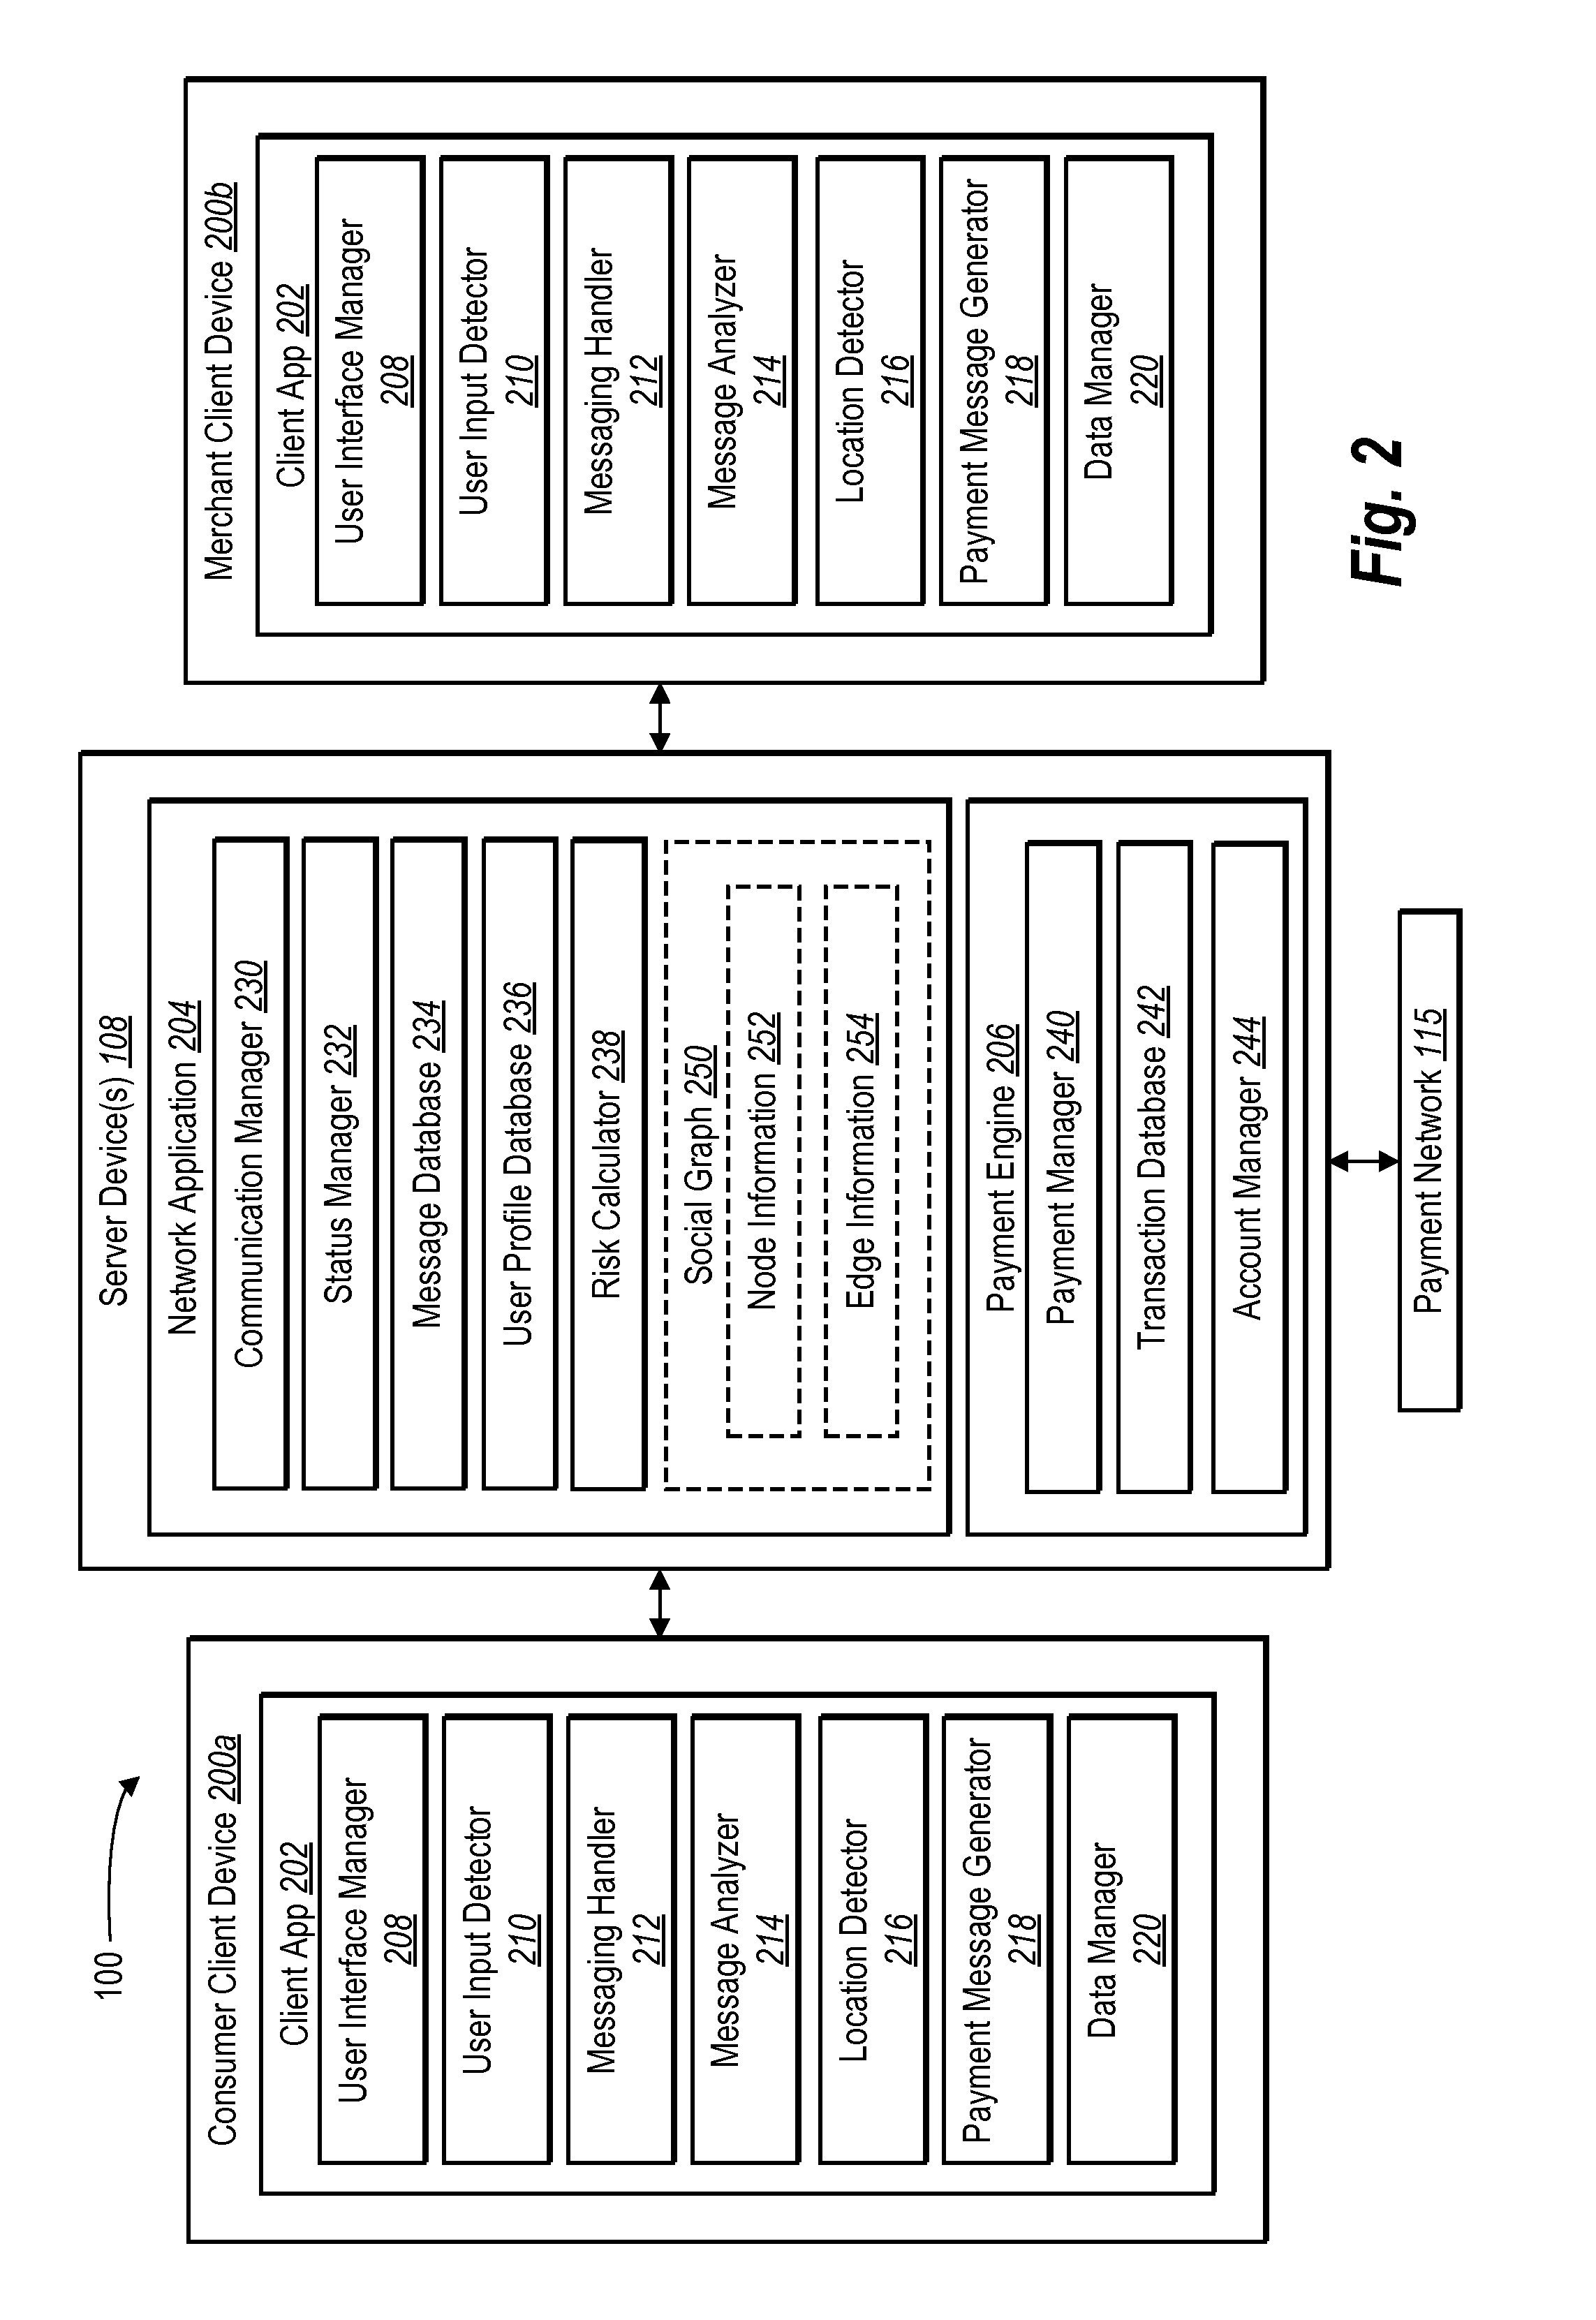 Facilitating sending and receiving of peer-to-business payments